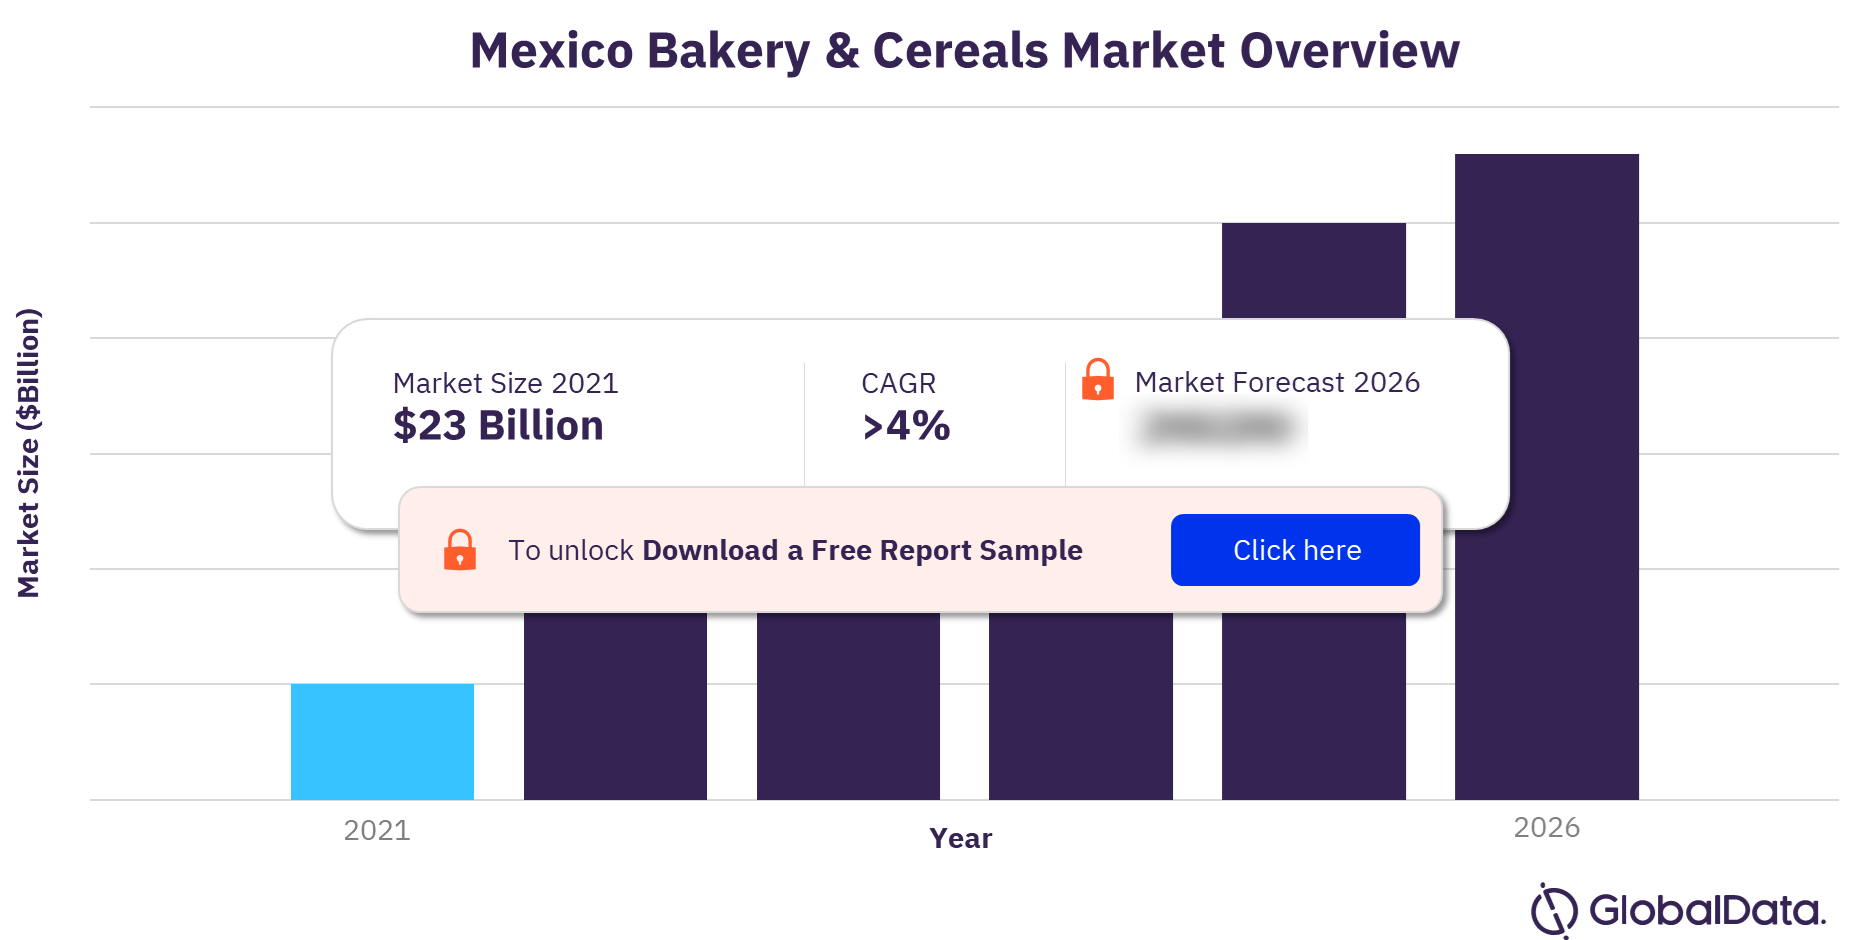 Mexico Bakery & Cereals Market Outlook